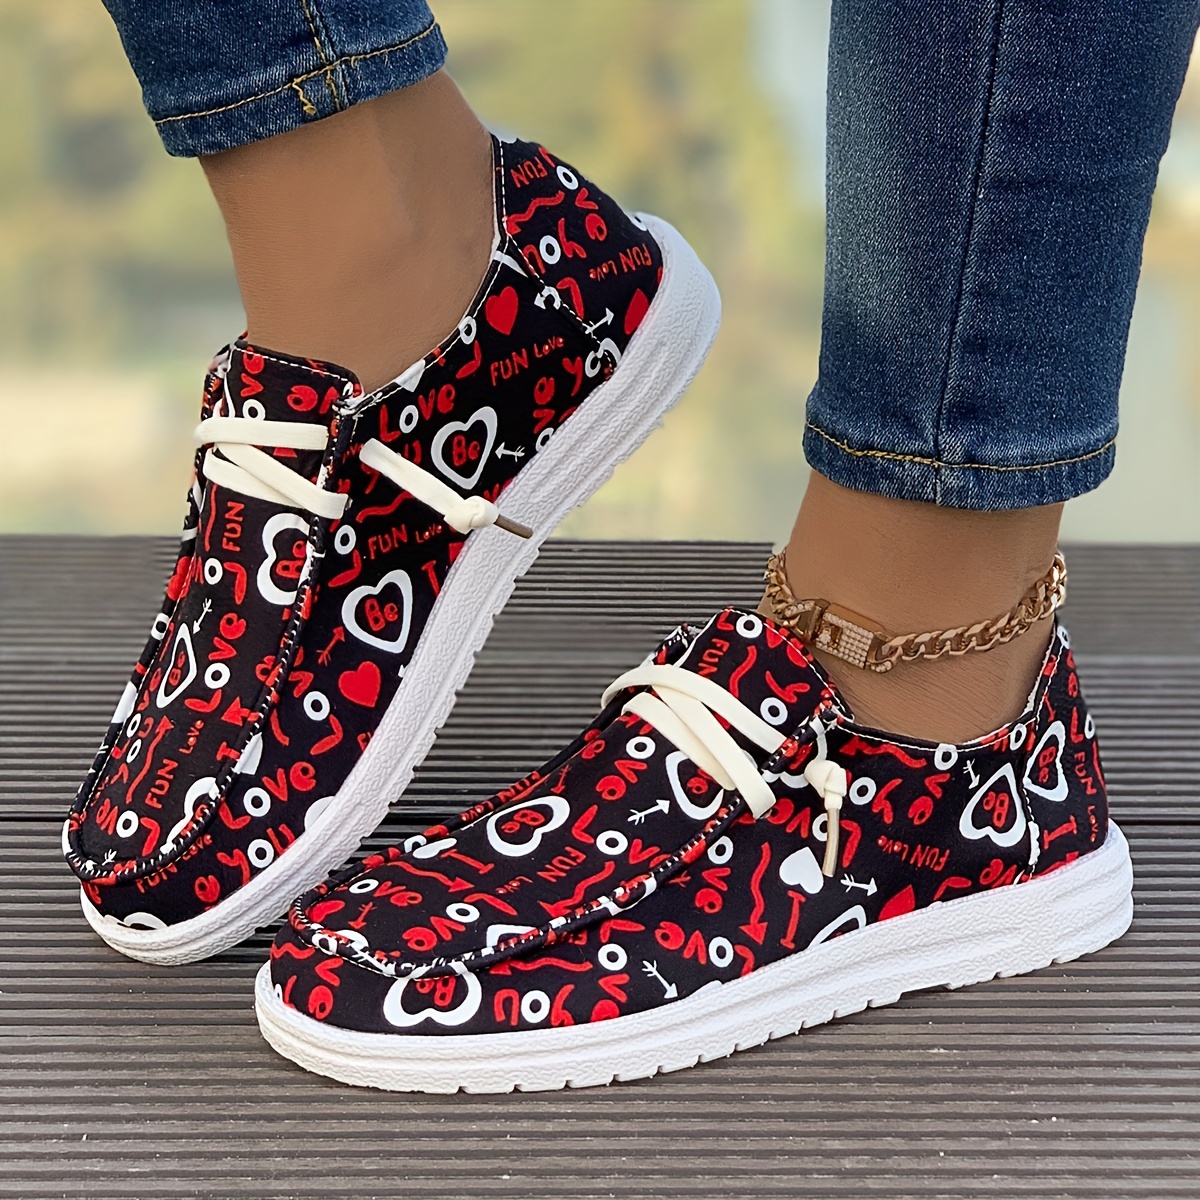 

Women's Fashion Outdoor Skate Shoes, Upper With Letters And Hearts Pattern, Flat Comfortable Light Lace-up Skate Shoes